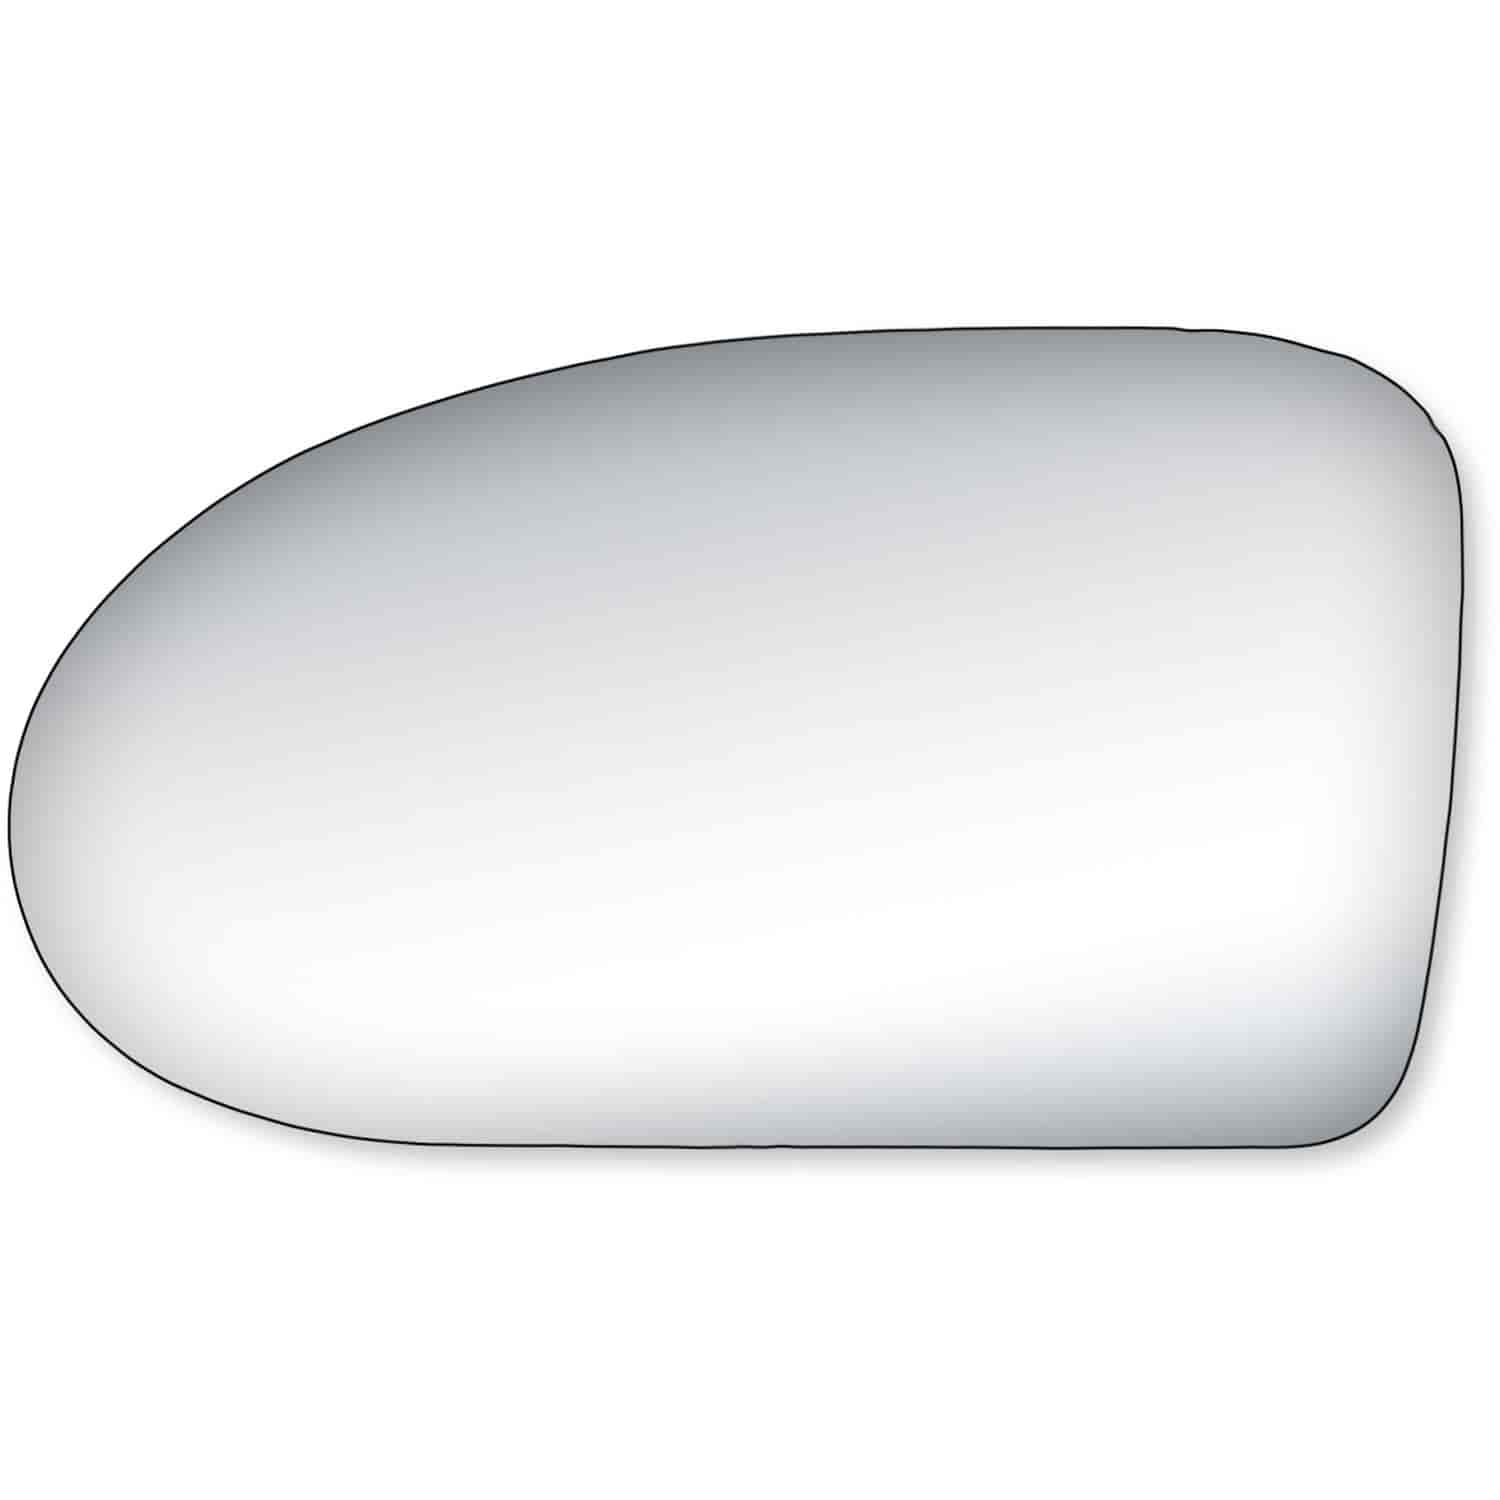 Replacement Glass for 92-99 LeSabre; 91-96 Park Avenue; 91-96 Ultra; 92-99 LSS; 92-99 Regency; 92-96